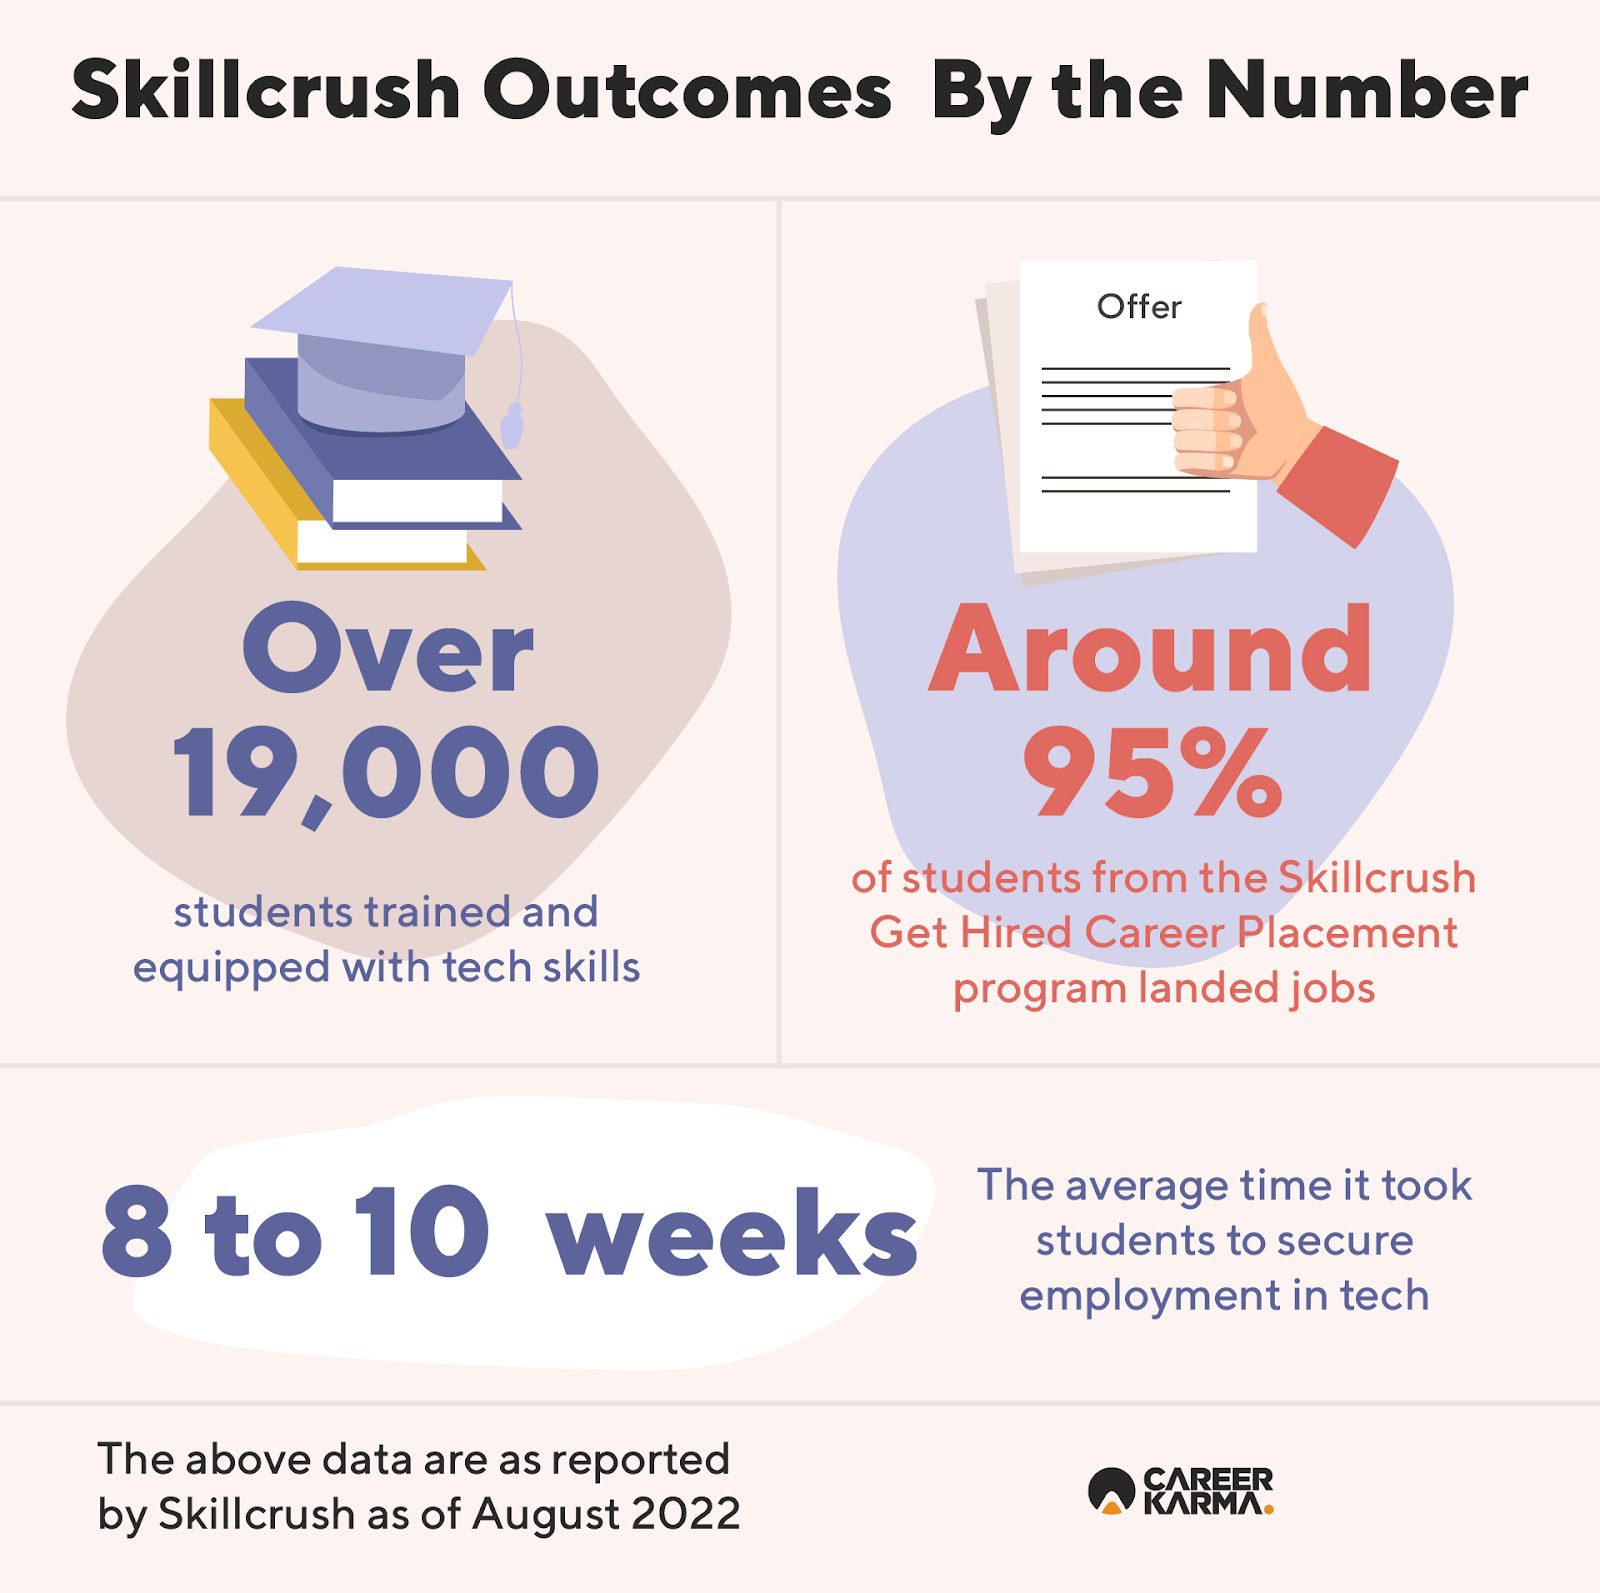 An infographic highlighting Skillcrush’s latest outcomes as of August 2022